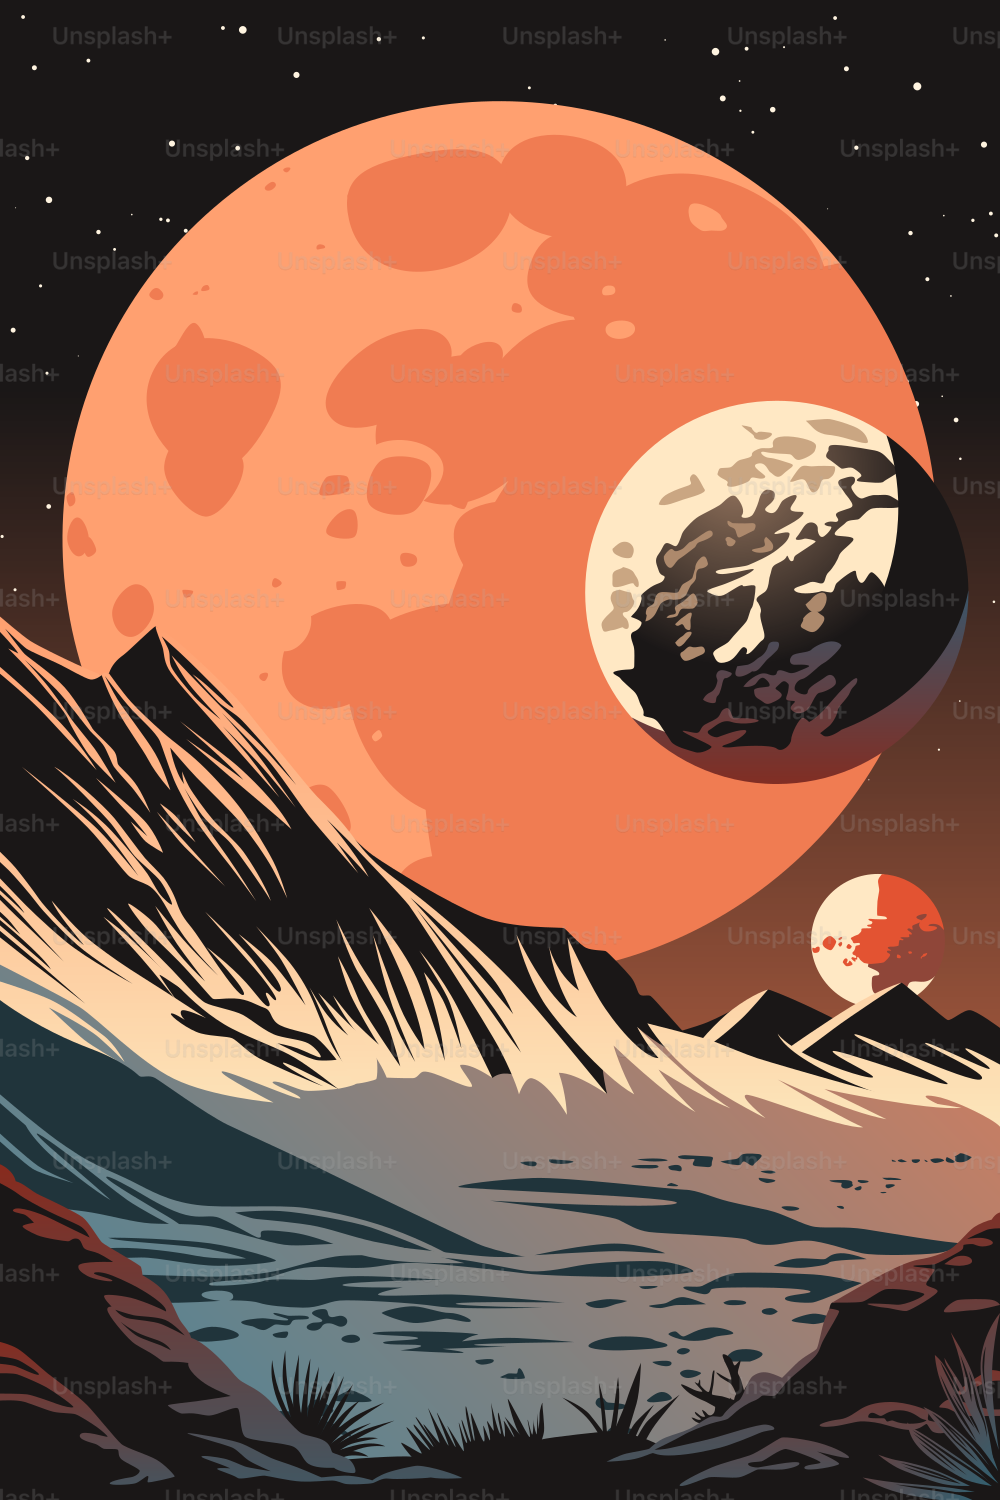 Space Poster. Surface of a Planet Out There. Strange Skies with Moons and Asteroids.